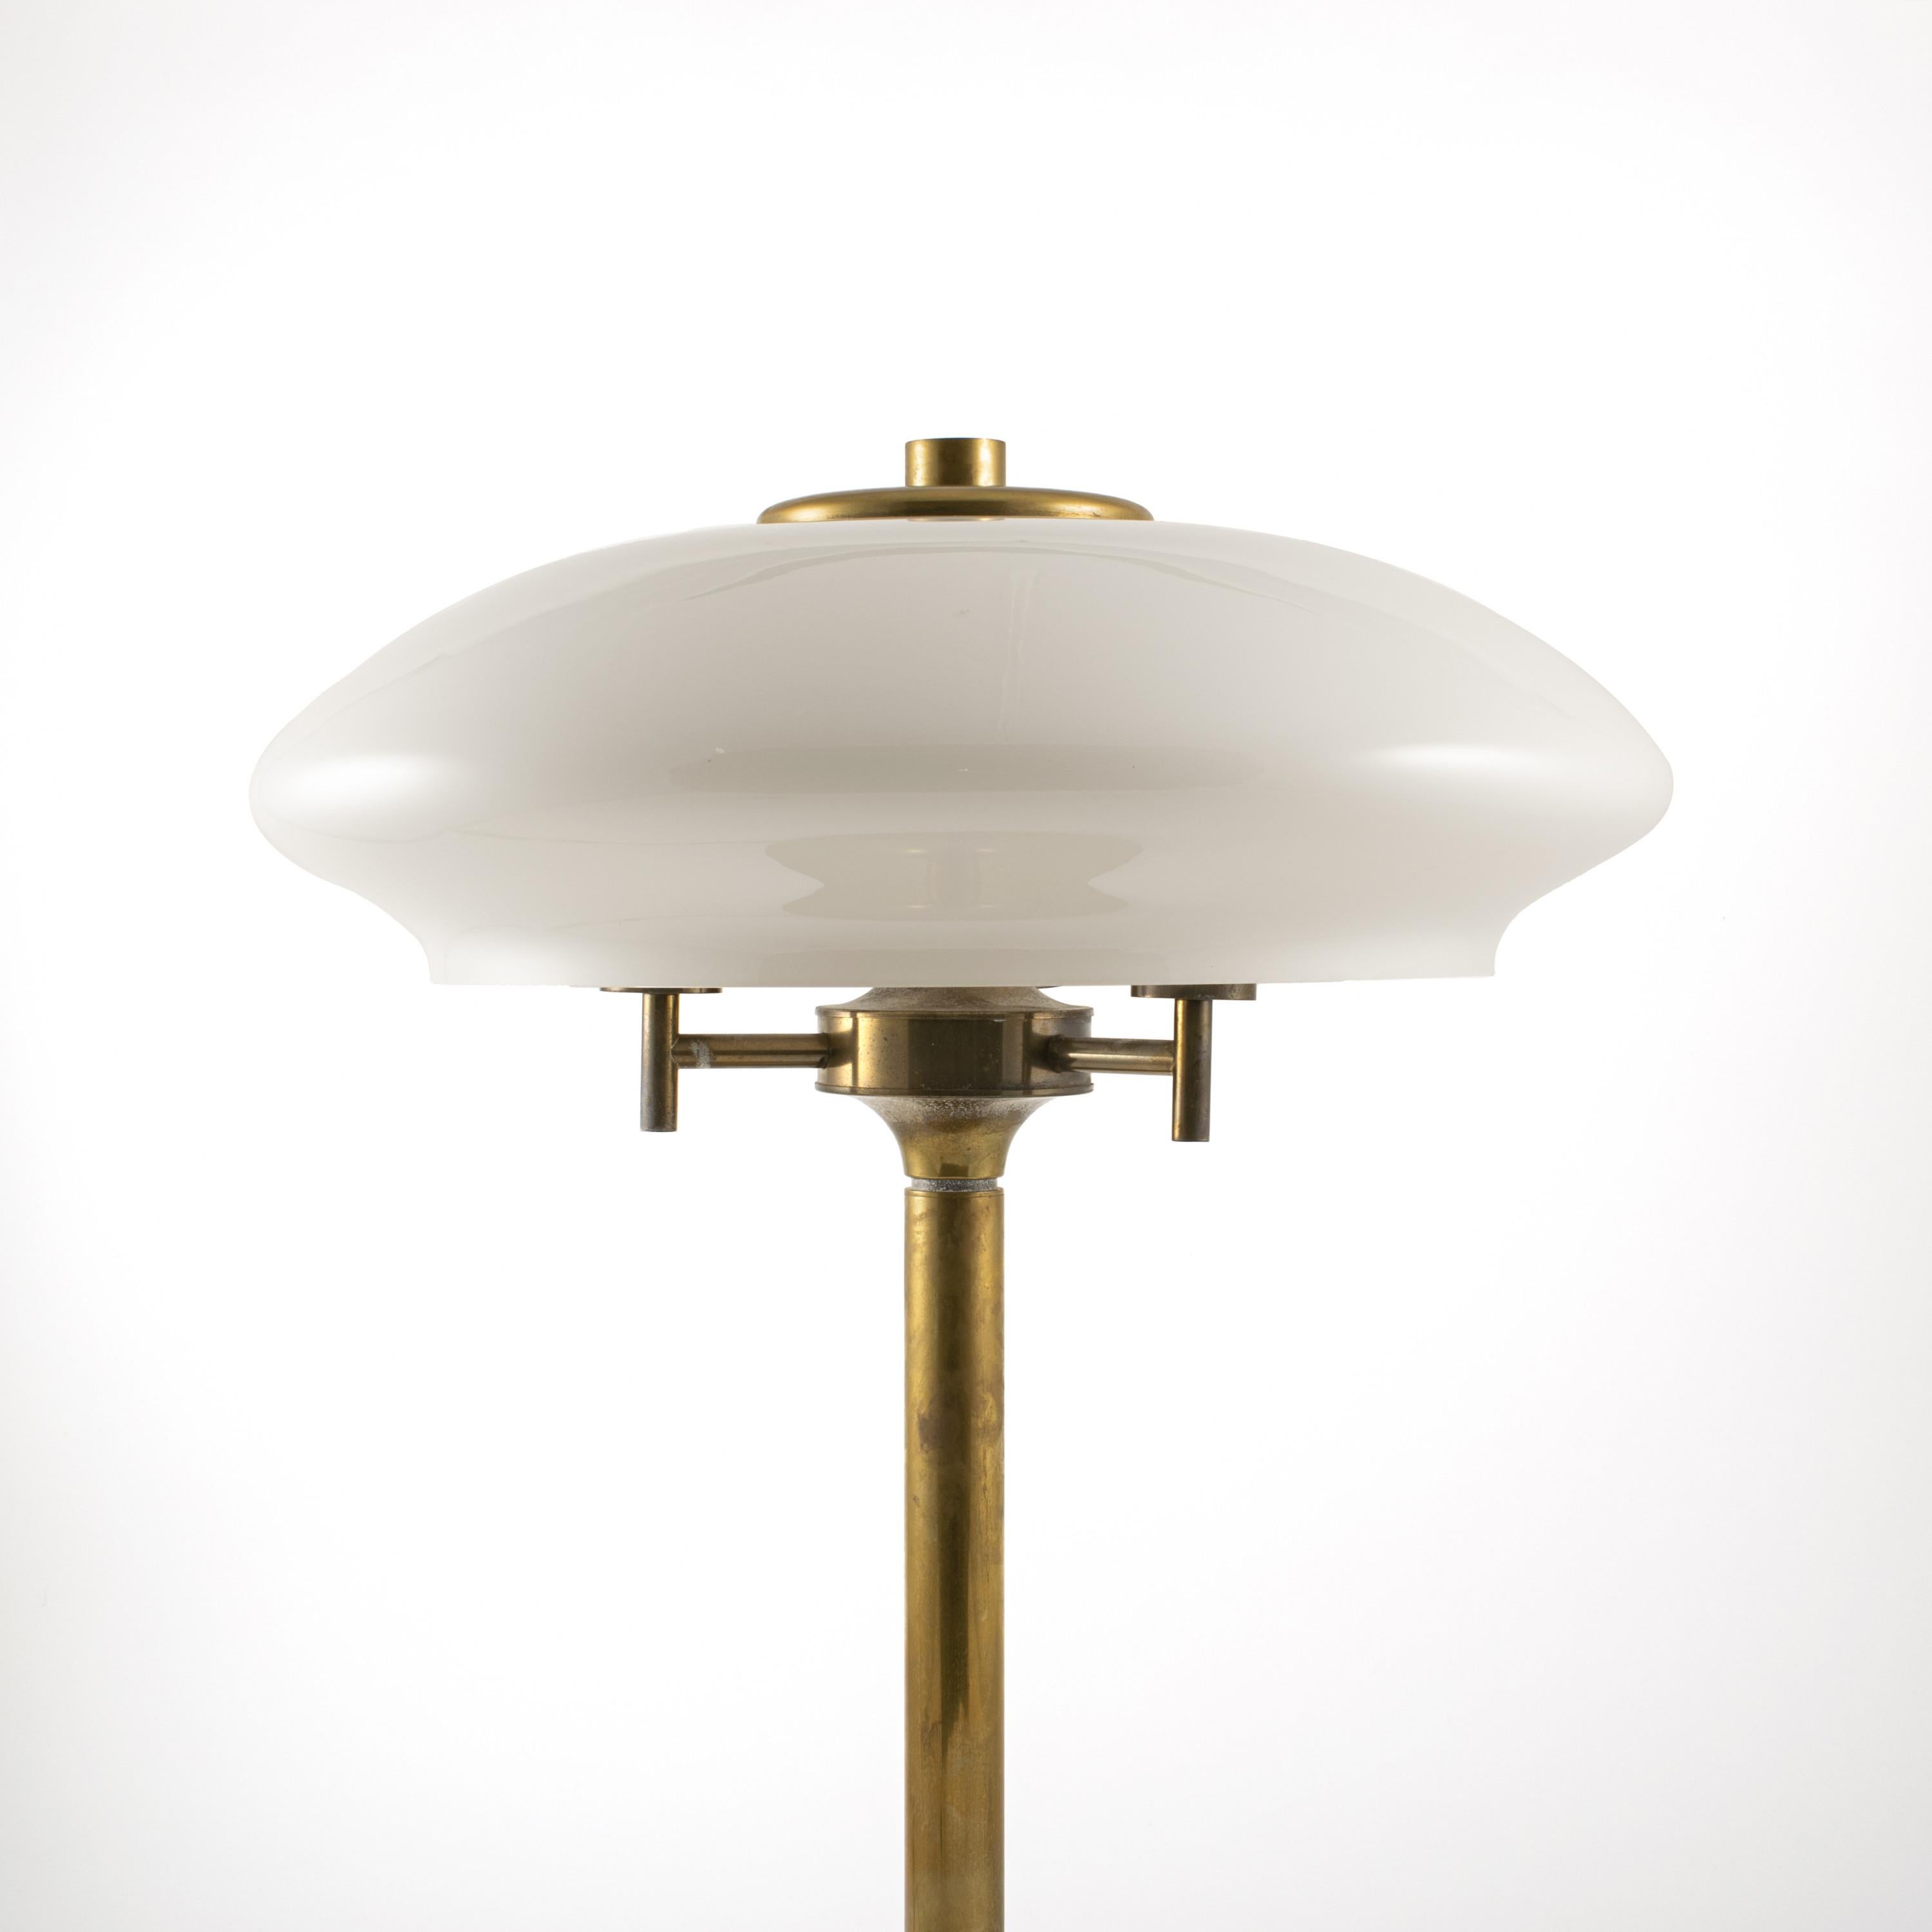 Large brass table lamp with shade of opal glass. Three light sources.
Denmark, 1950s.
The lamp is in original and untouched condition.

Base diameter 30 cm.